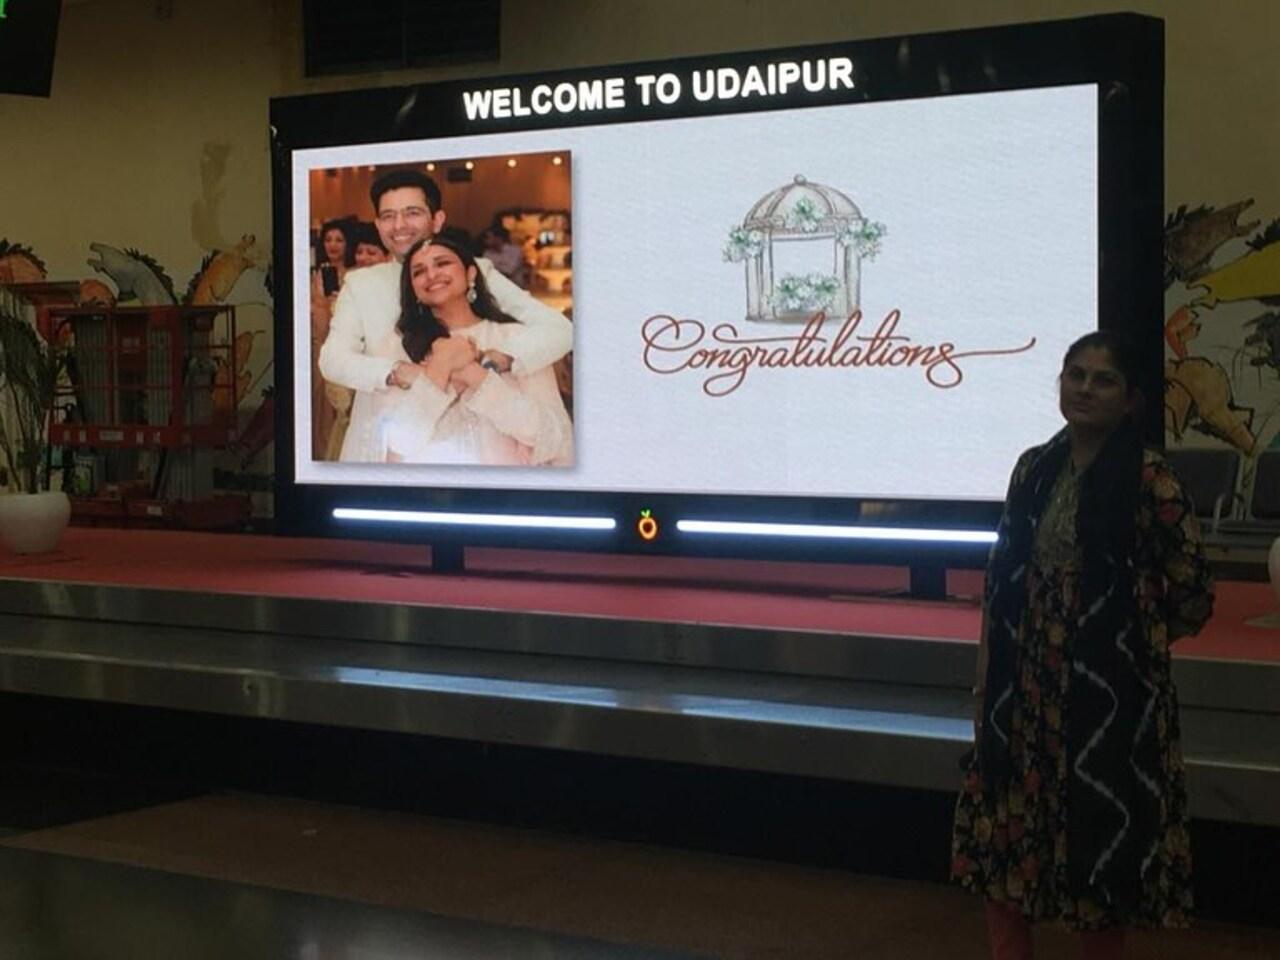 In one of the pictures, an LED board flashed a pic of the couple from their engagement day. The board read, 